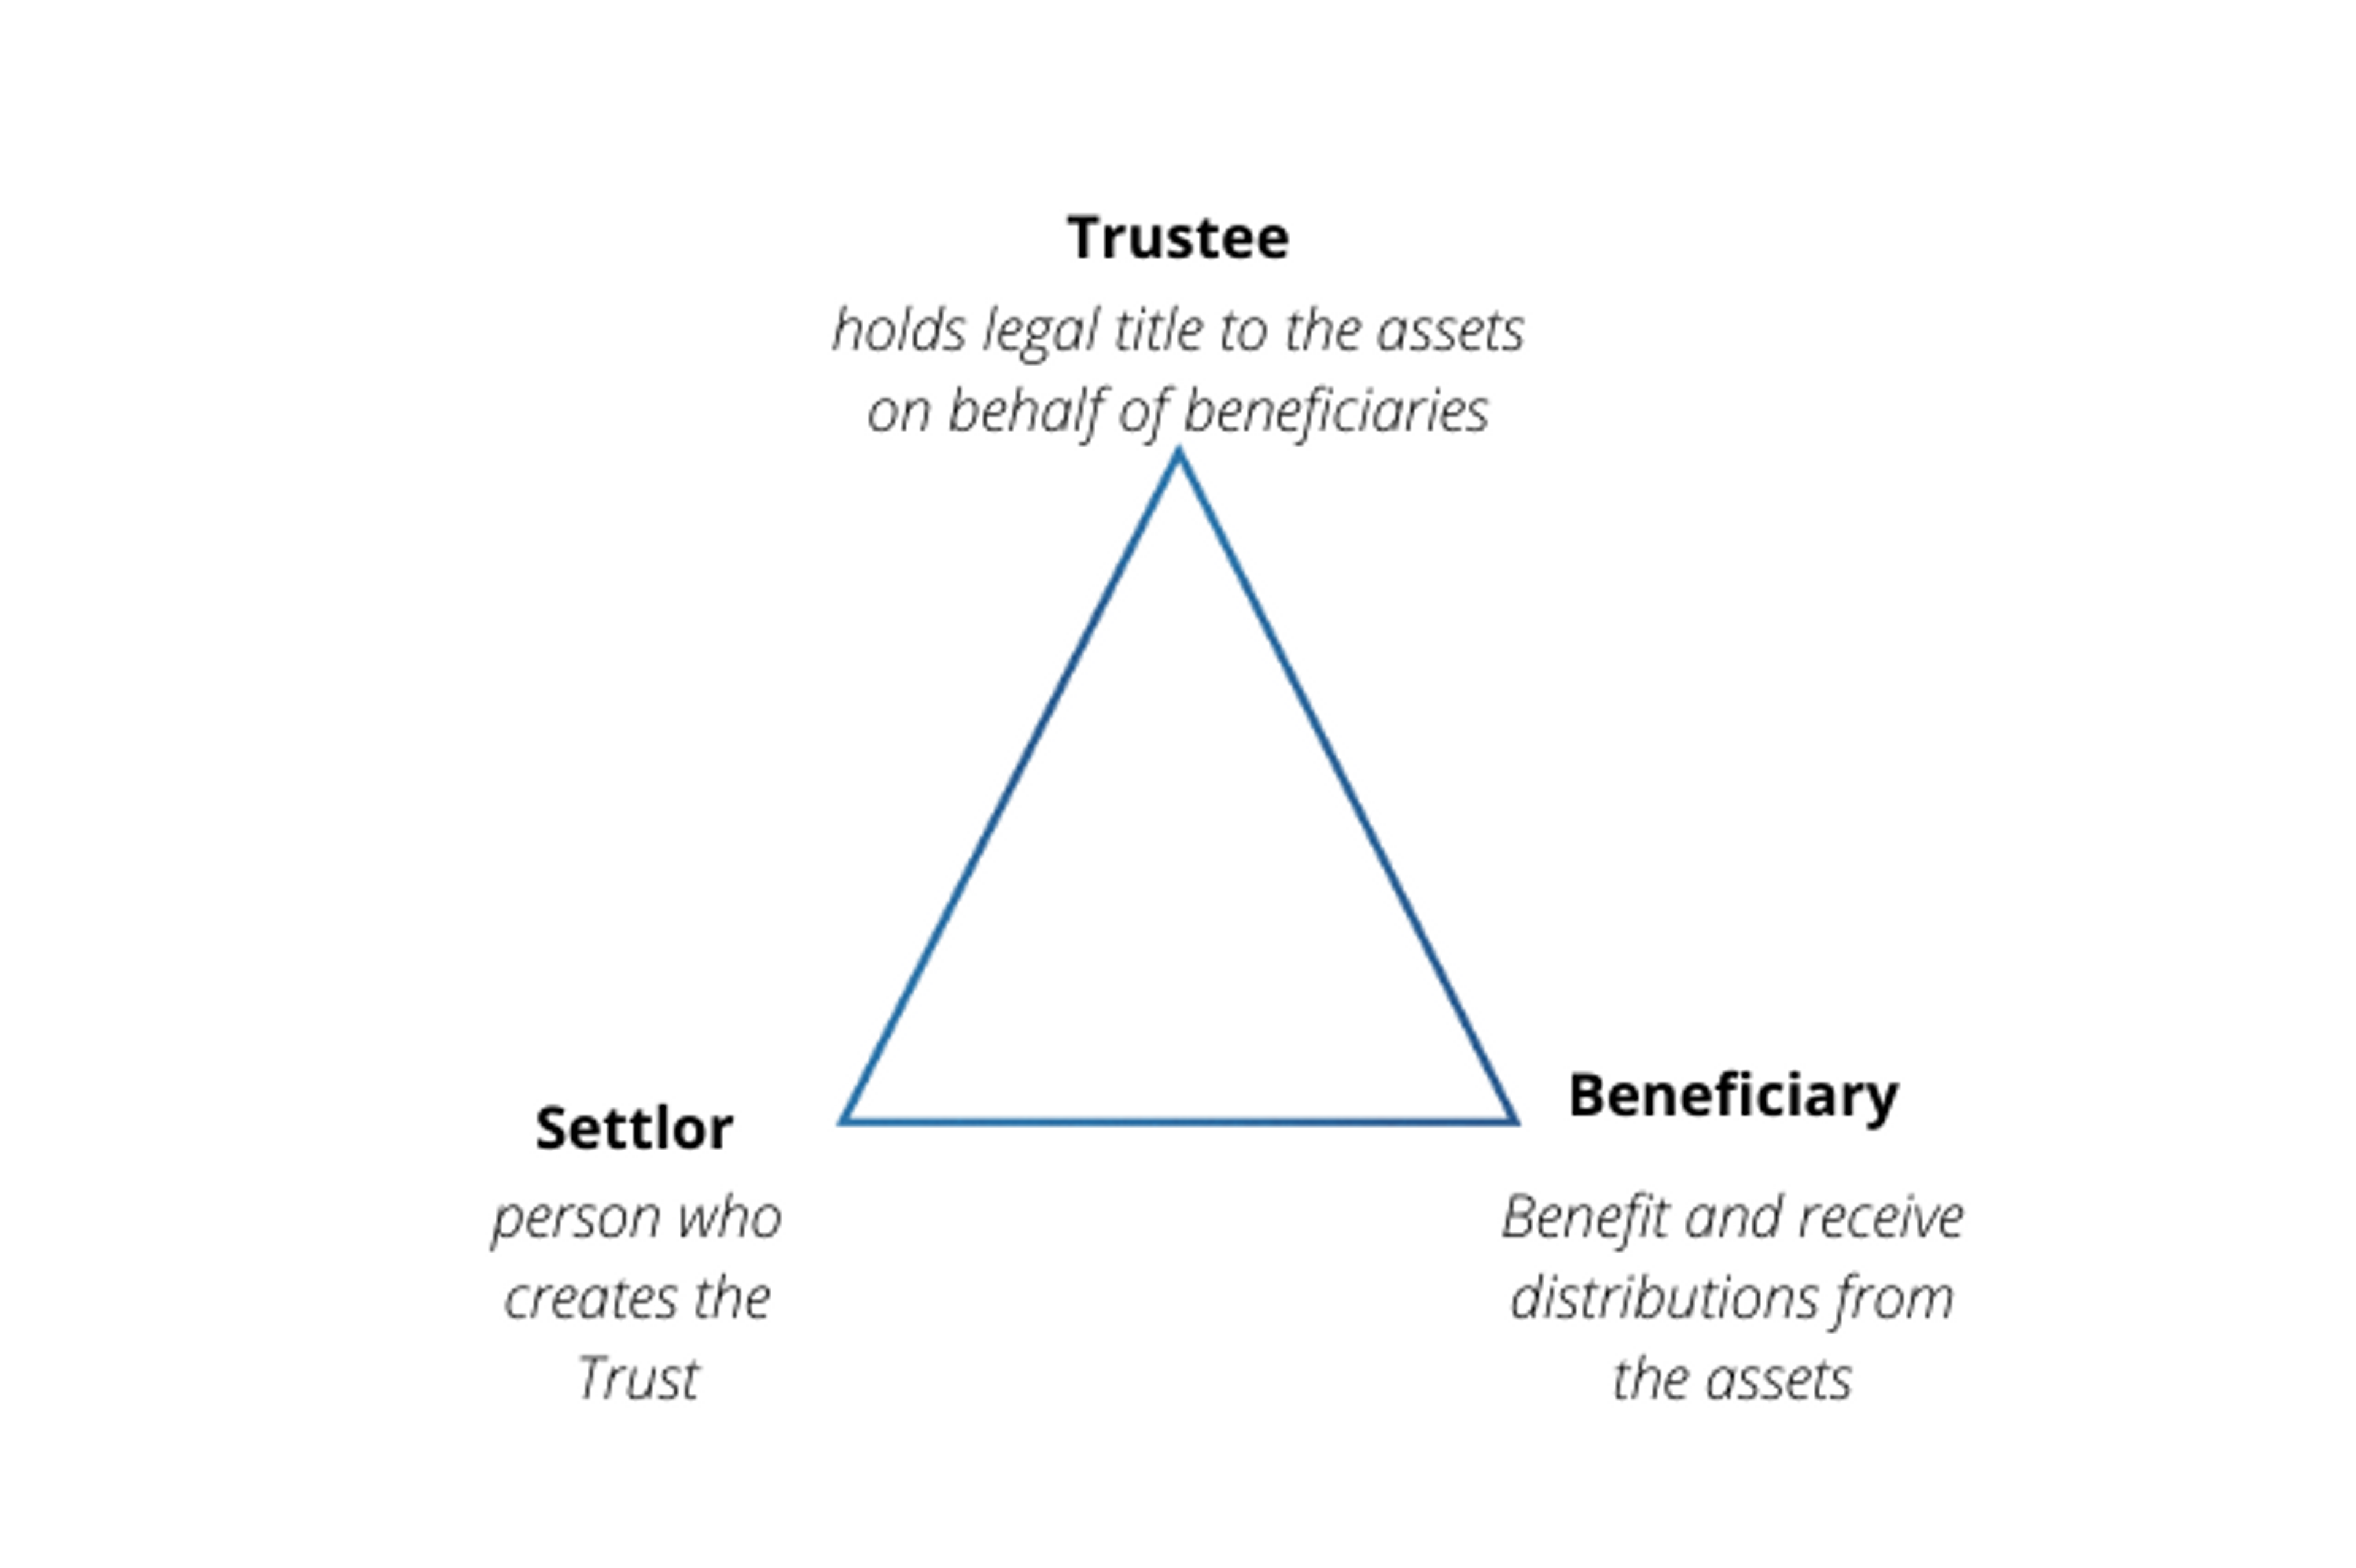 key players in a trust, the trustmaker (or settlor), trustee, and beneficiary